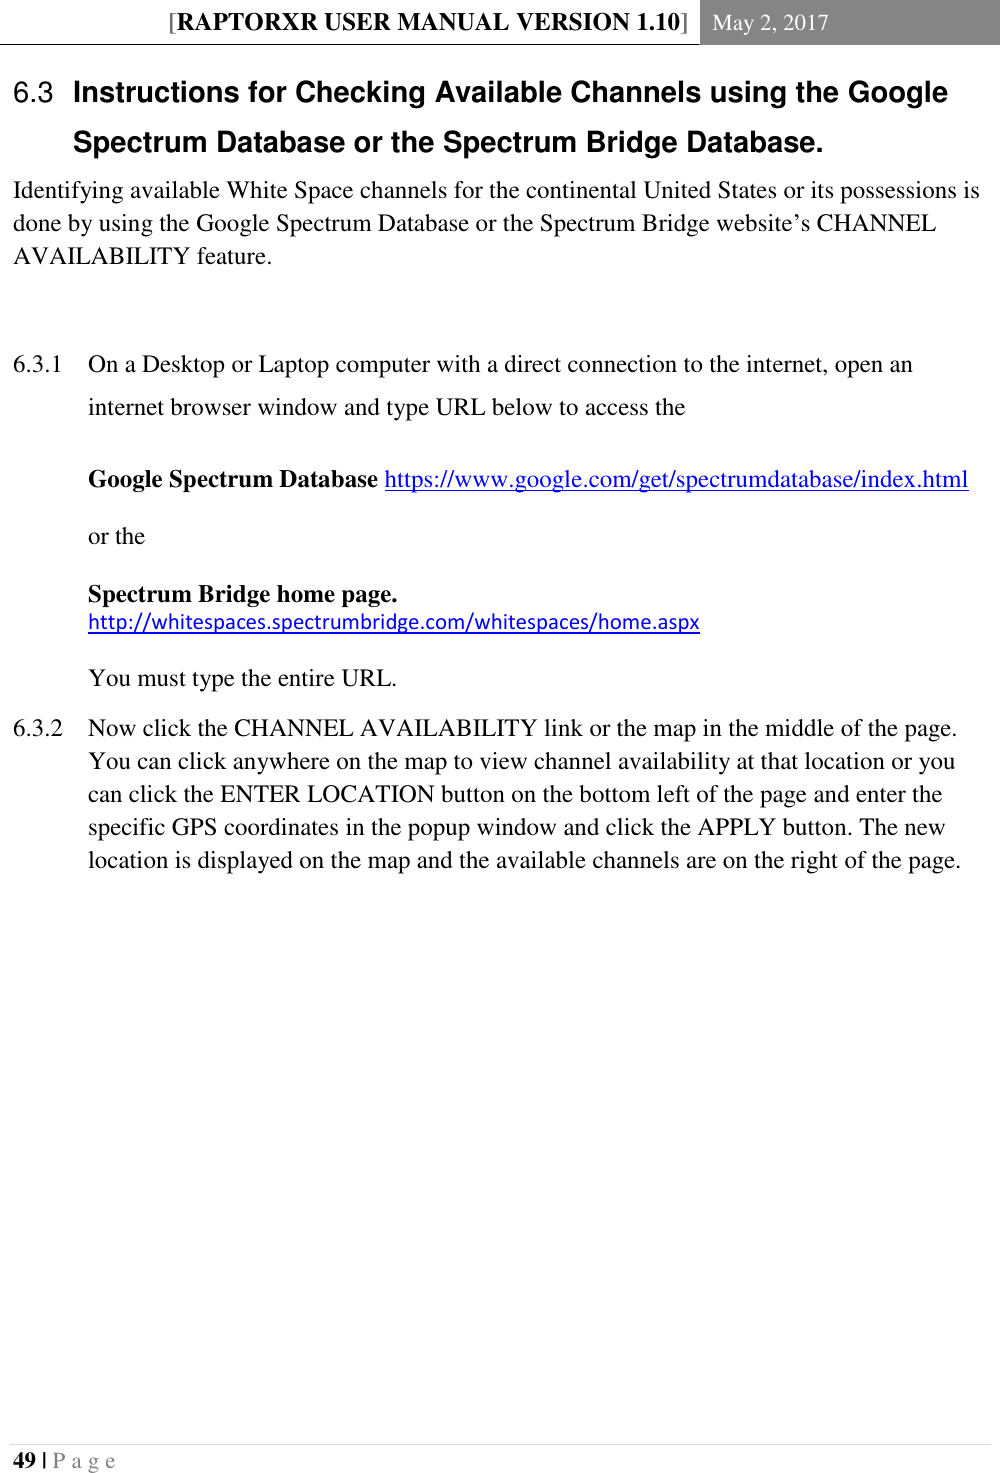 [RAPTORXR USER MANUAL VERSION 1.10] May 2, 2017  49 | P a g e    Instructions for Checking Available Channels using the Google 6.3Spectrum Database or the Spectrum Bridge Database. Identifying available White Space channels for the continental United States or its possessions is done by using the Google Spectrum Database or the Spectrum Bridge website’s CHANNEL AVAILABILITY feature.    On a Desktop or Laptop computer with a direct connection to the internet, open an 6.3.1internet browser window and type URL below to access the  Google Spectrum Database https://www.google.com/get/spectrumdatabase/index.html   or the   Spectrum Bridge home page. http://whitespaces.spectrumbridge.com/whitespaces/home.aspx  You must type the entire URL.  Now click the CHANNEL AVAILABILITY link or the map in the middle of the page. 6.3.2You can click anywhere on the map to view channel availability at that location or you can click the ENTER LOCATION button on the bottom left of the page and enter the specific GPS coordinates in the popup window and click the APPLY button. The new location is displayed on the map and the available channels are on the right of the page.           